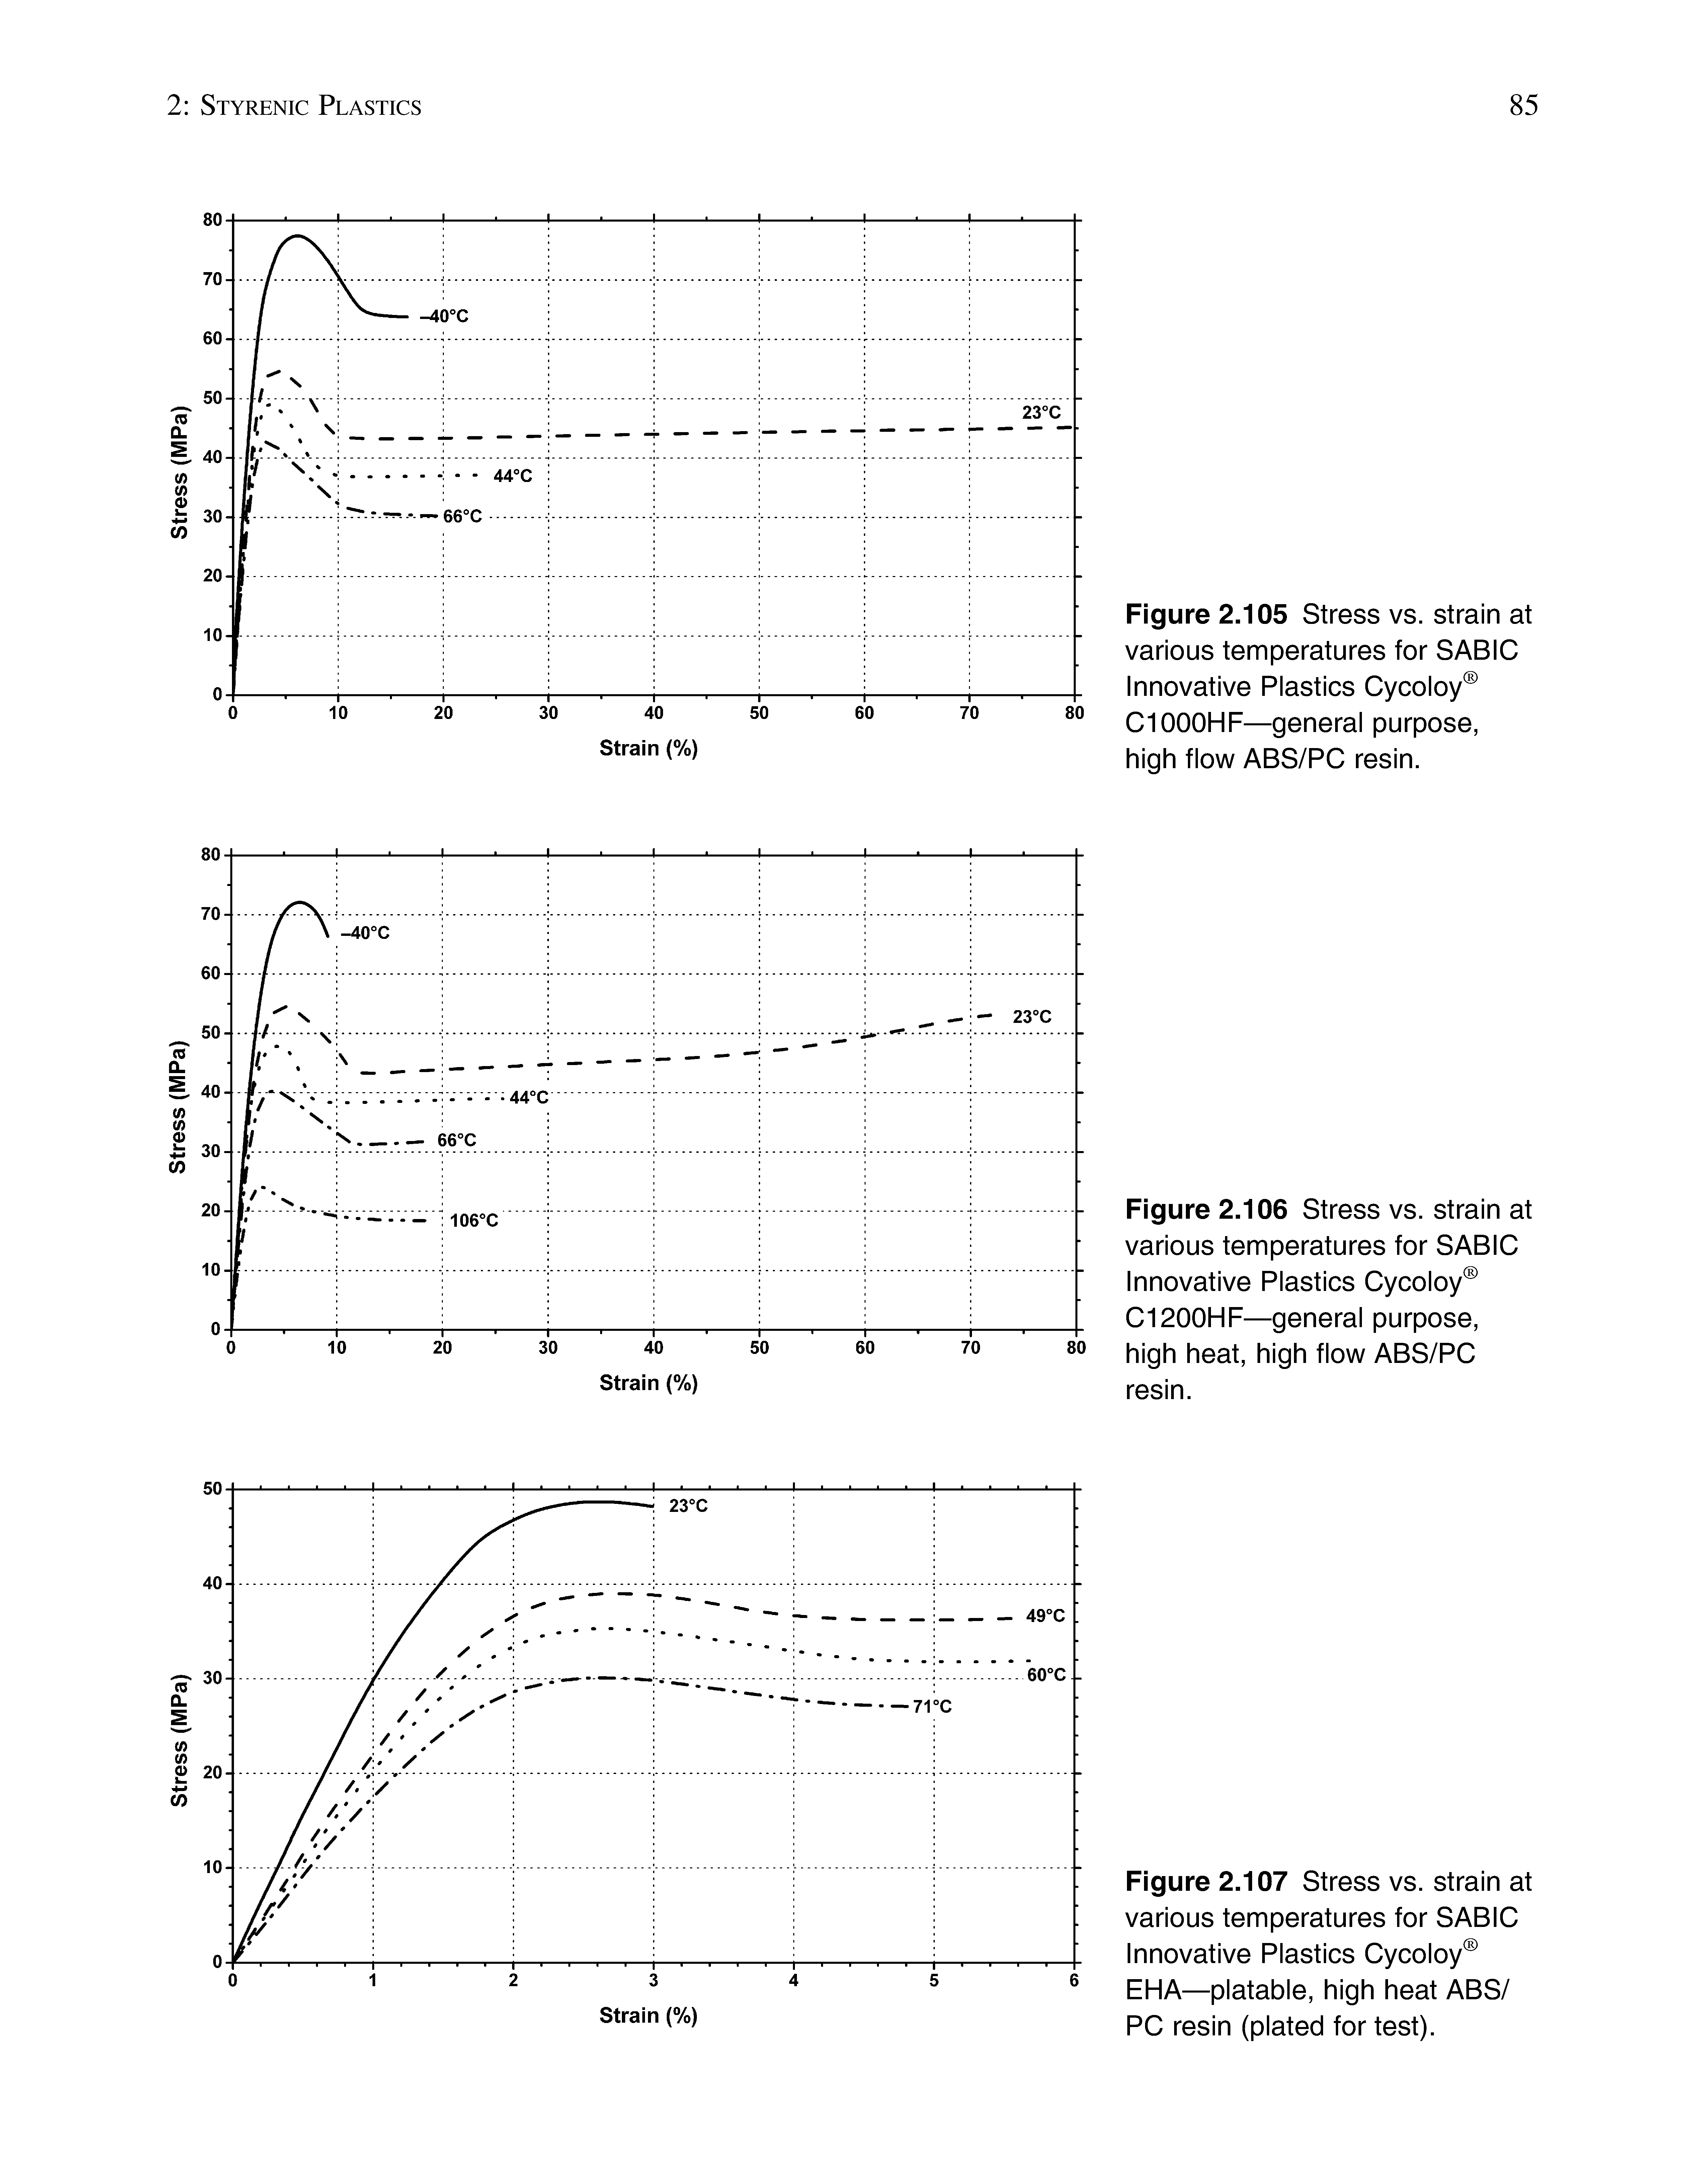 Figure 2.105 Stress vs. strain at various temperatures for SABIC Innovative Plastics Cycoloy C1000HF—general purpose, high flow ABS/PC resin.